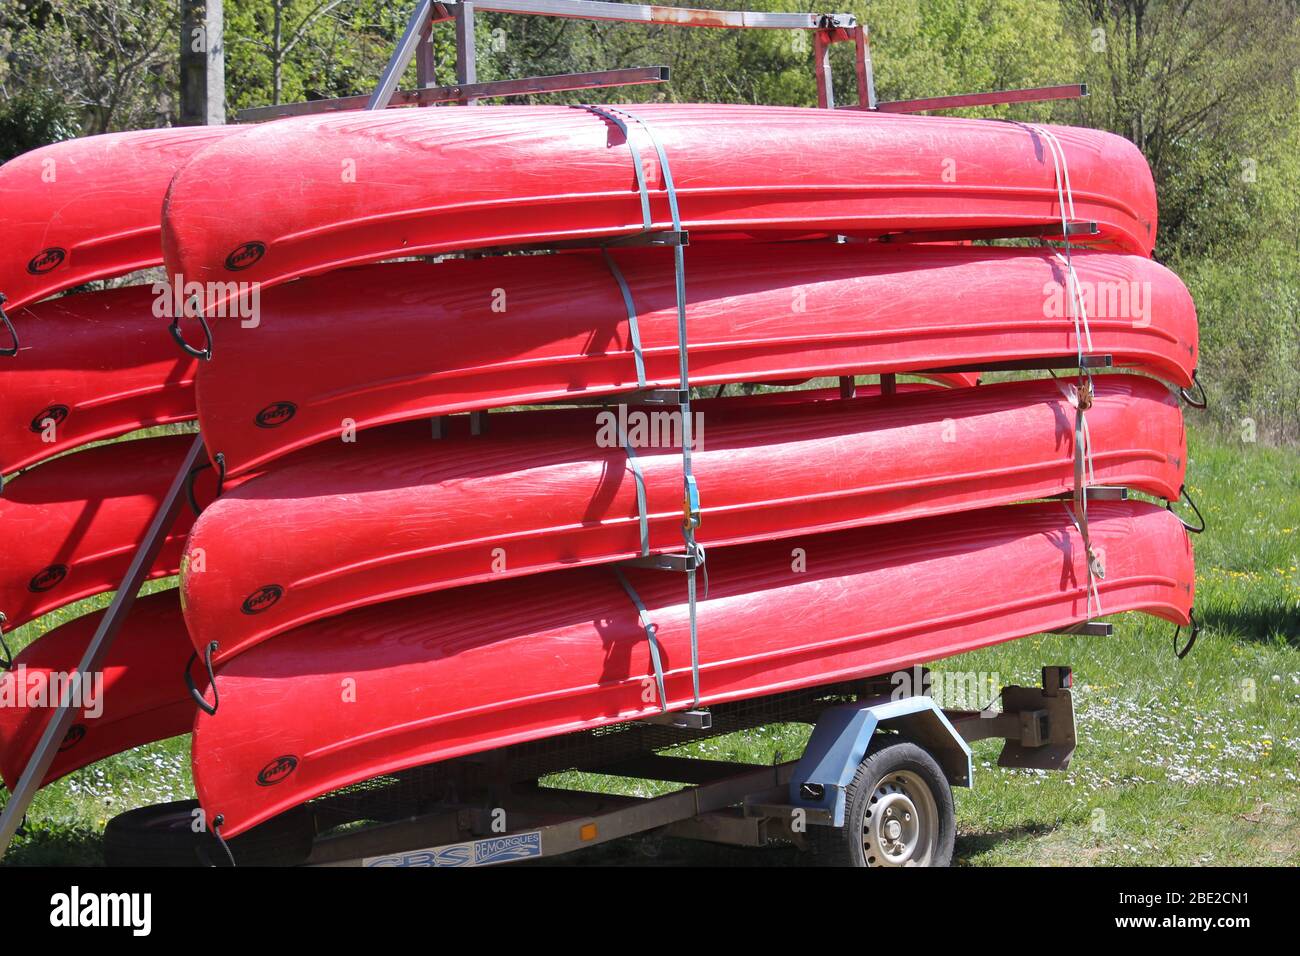 Red canoes stacked on a trailer Stock Photo